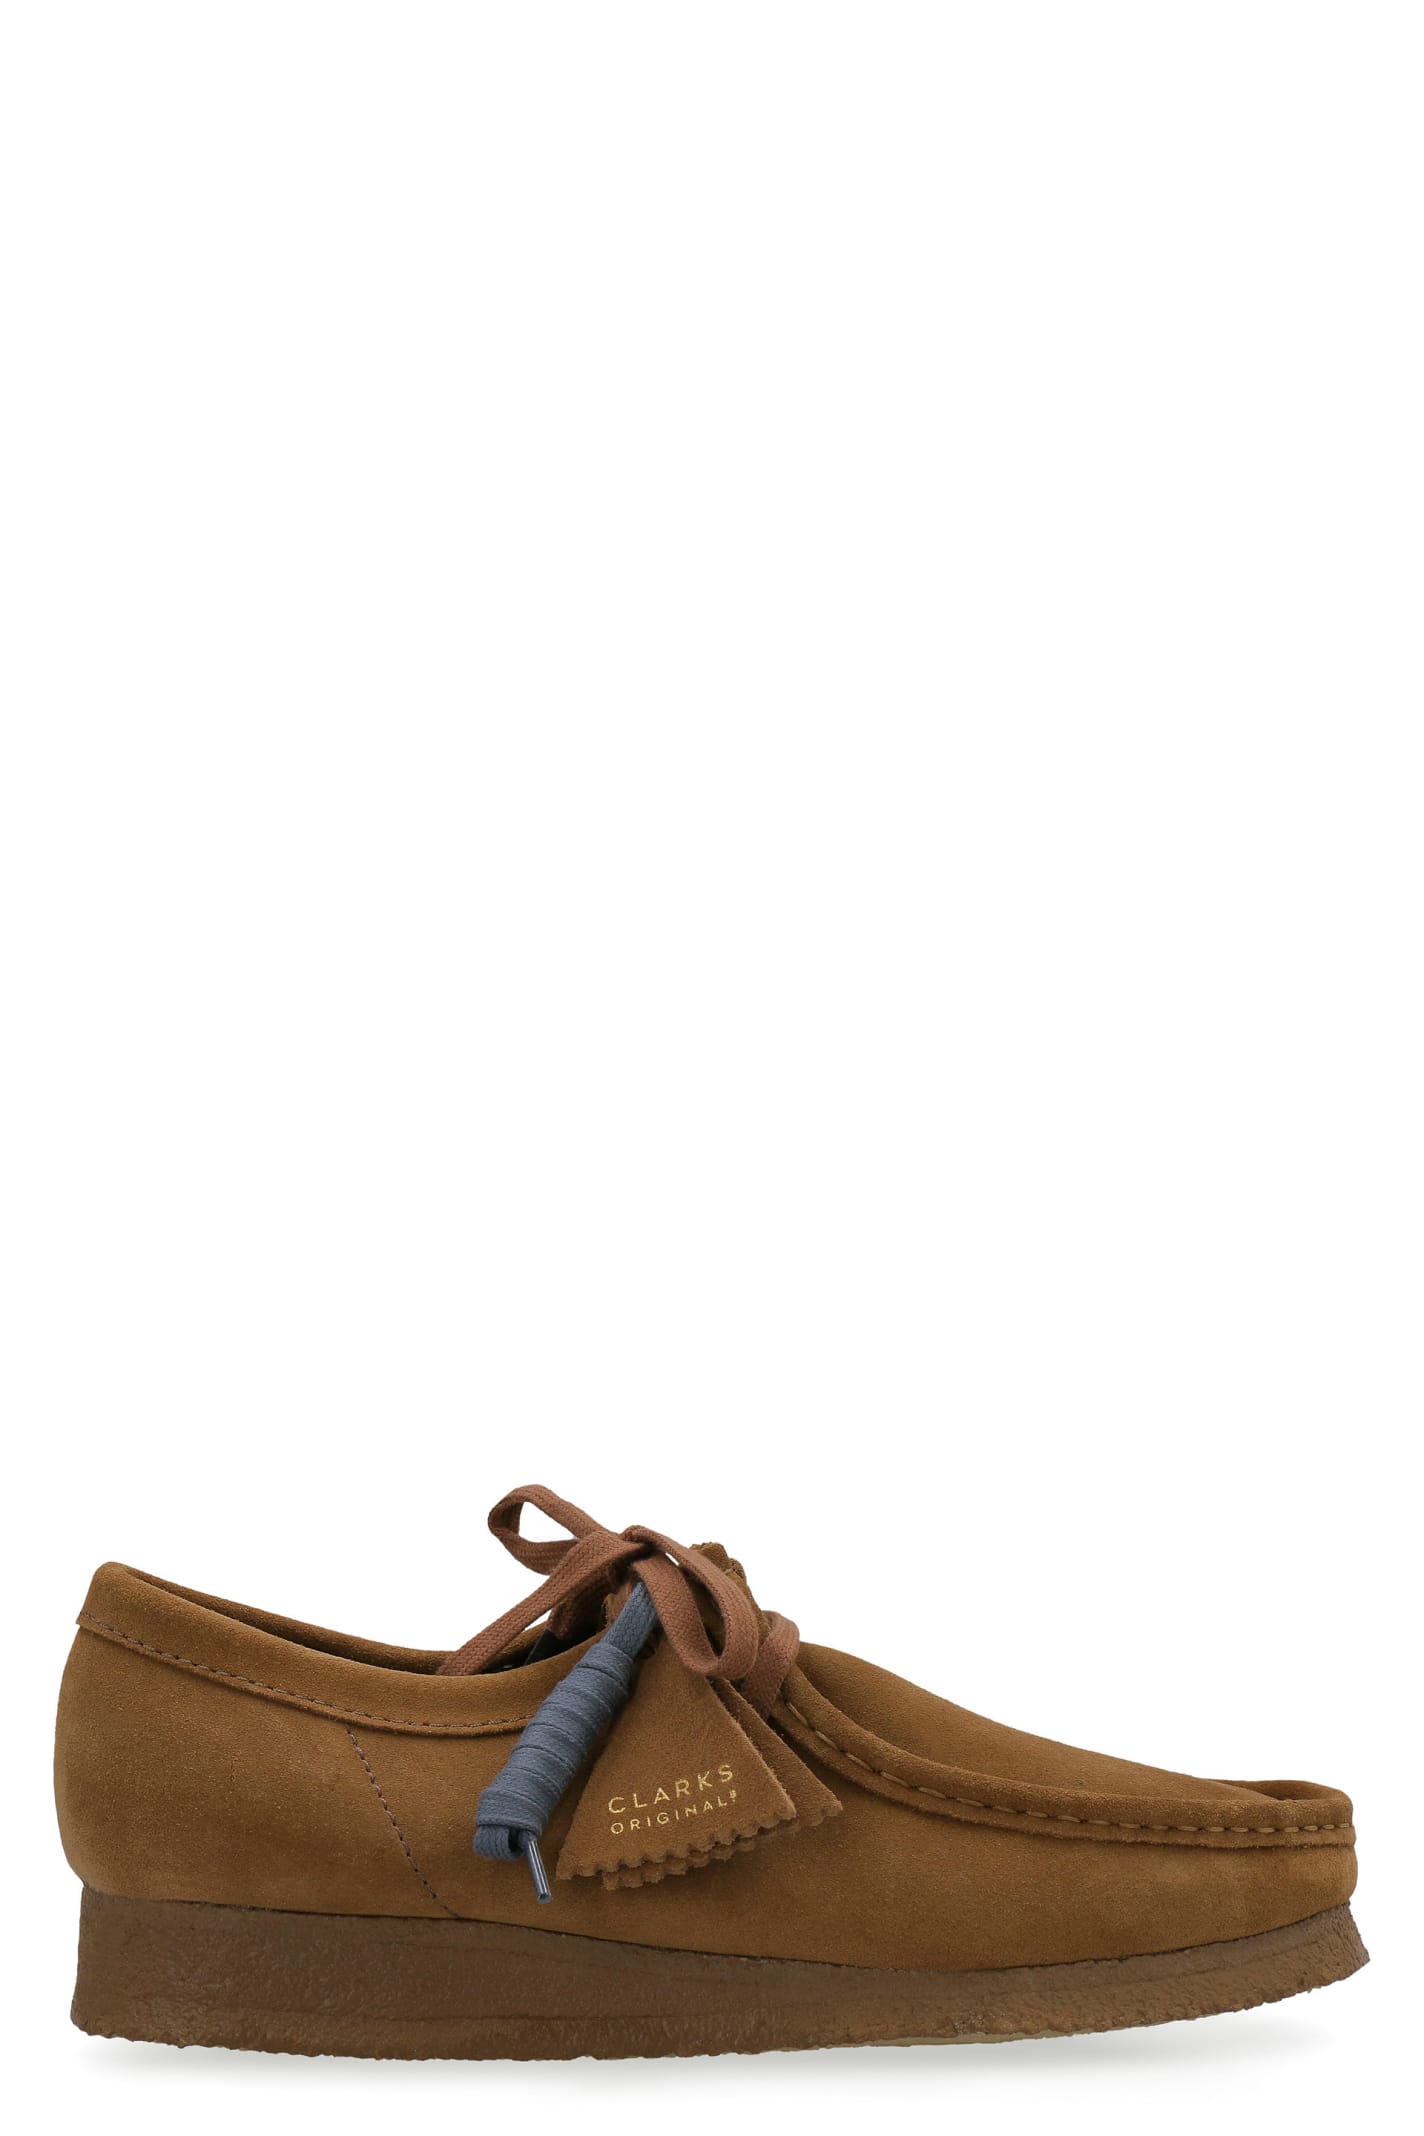 Clarks Wallabee Suede Lace-Up Shoes